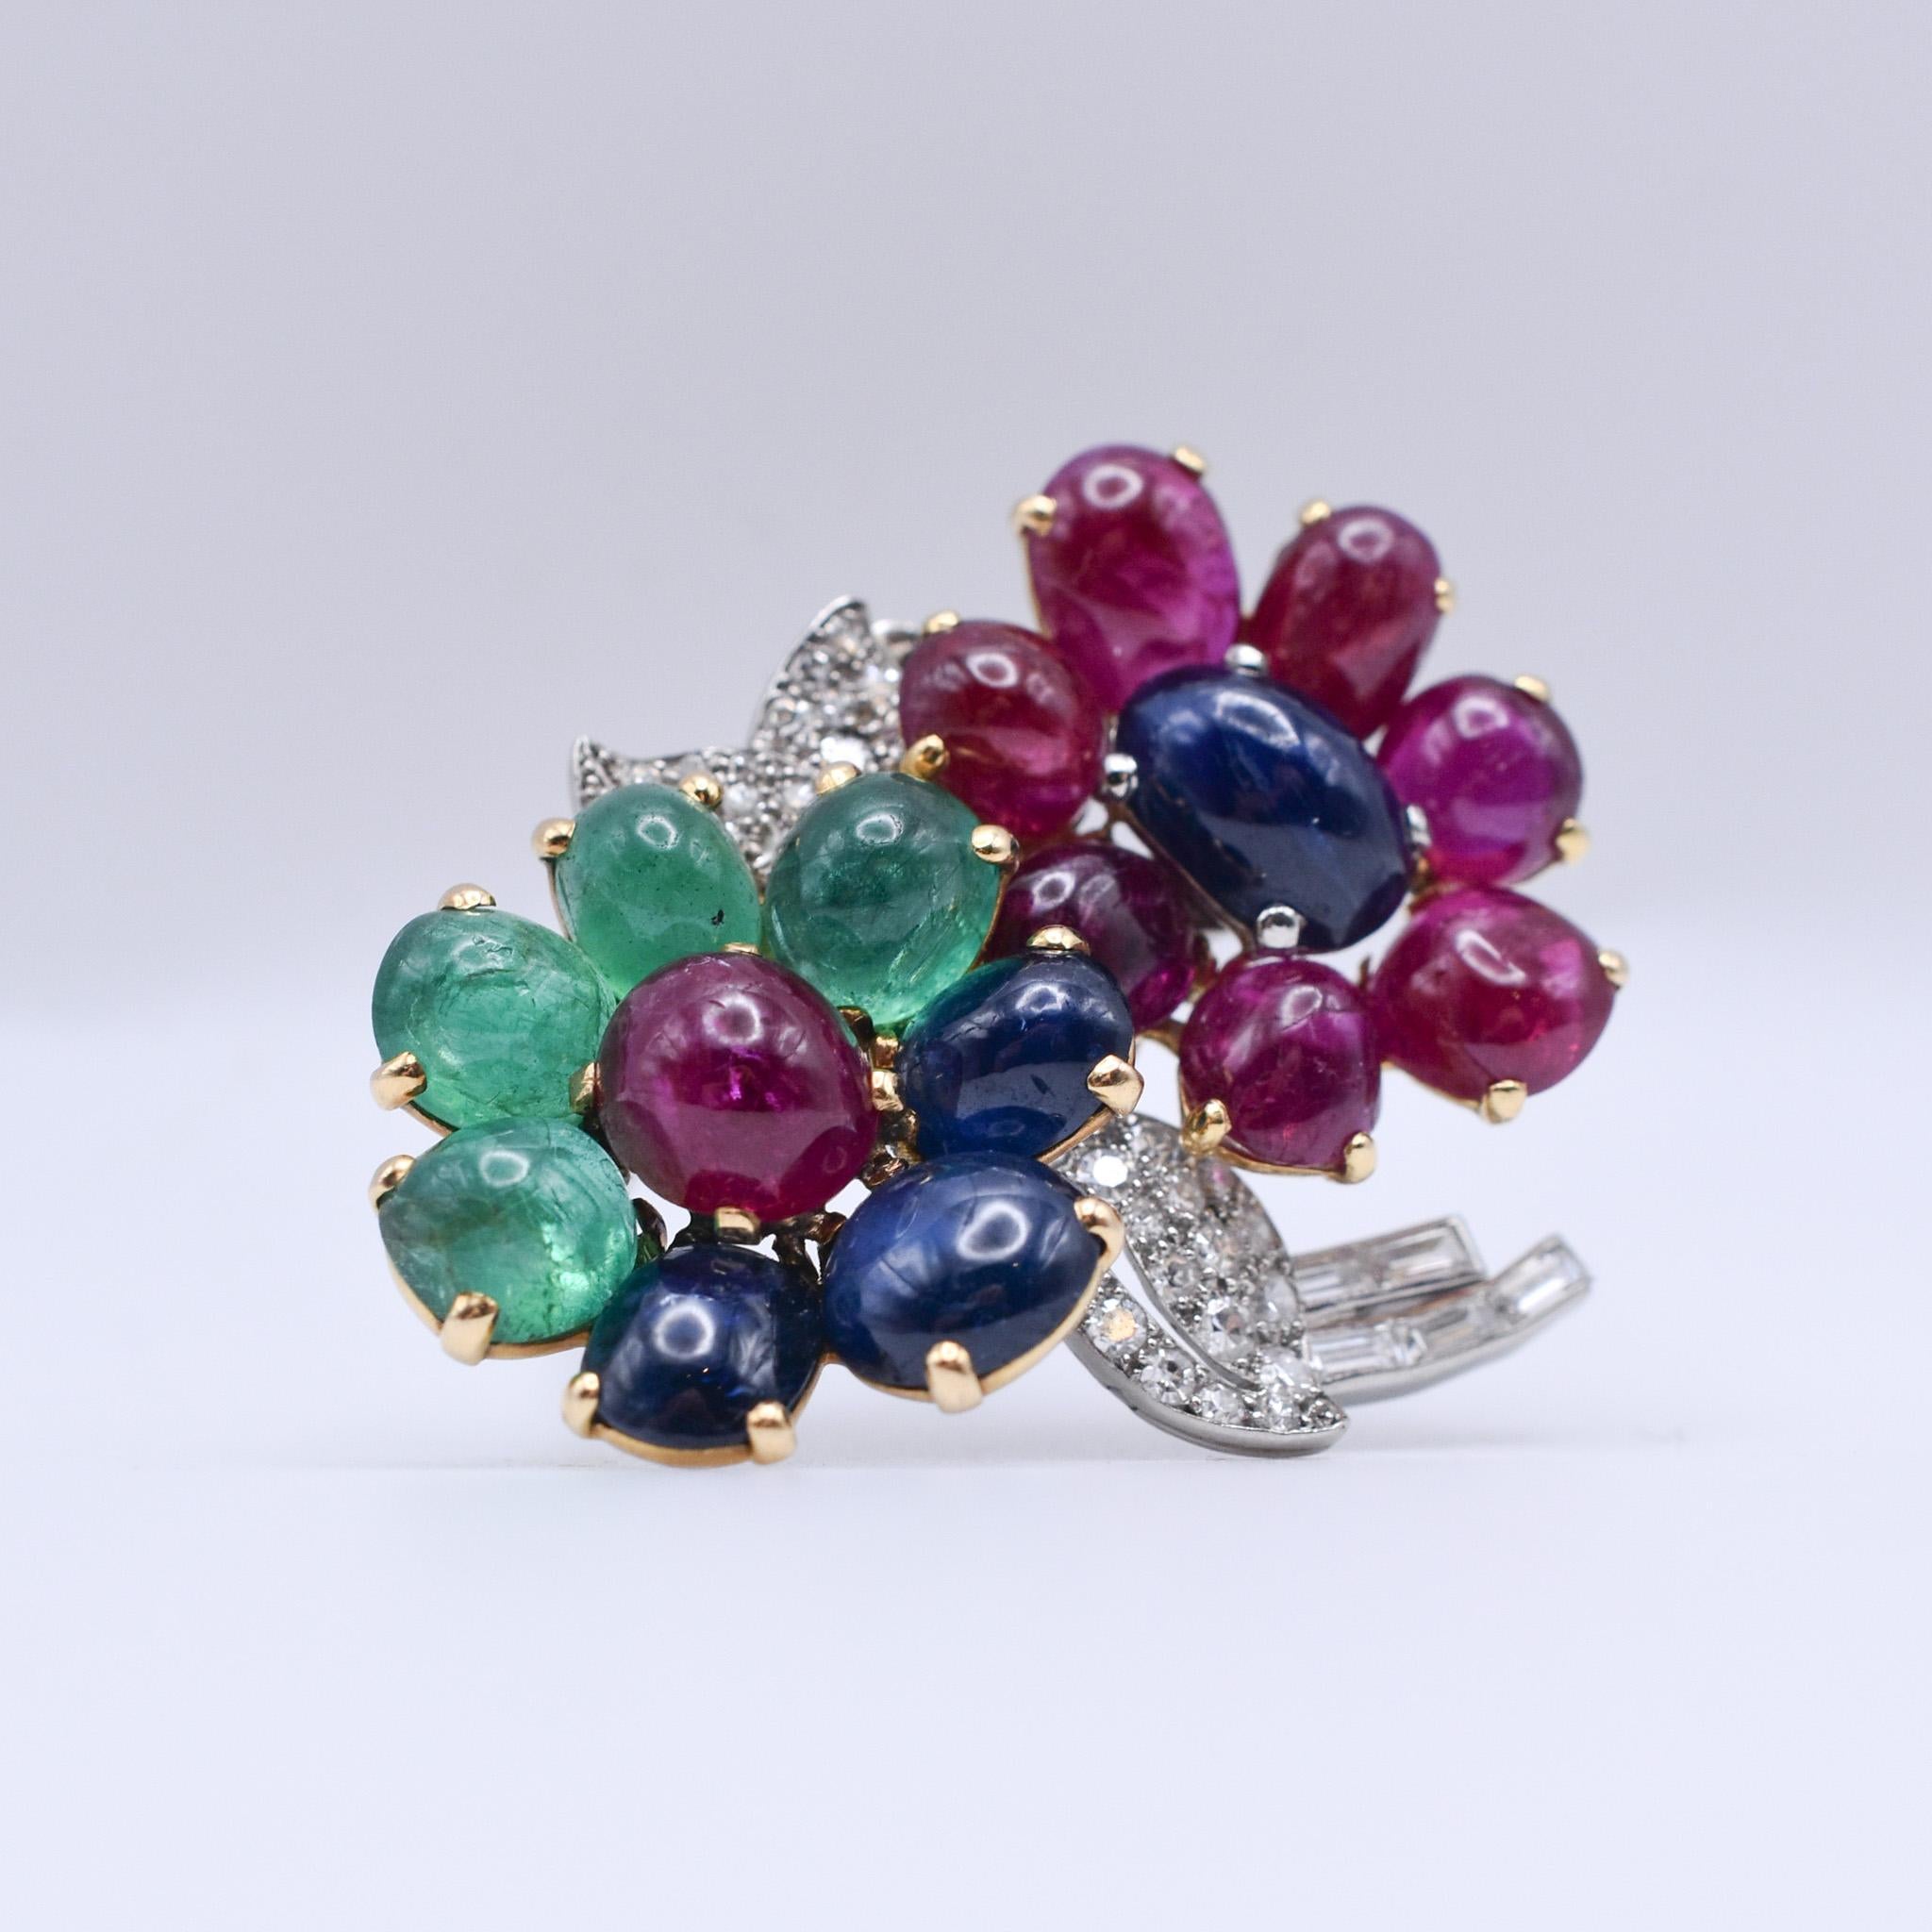 A beautiful, rare and collectible floral brooch by Cartier, with cabochon rubies, emeralds and sapphires, highlighted by diamonds. Made in Paris, circa 1930.